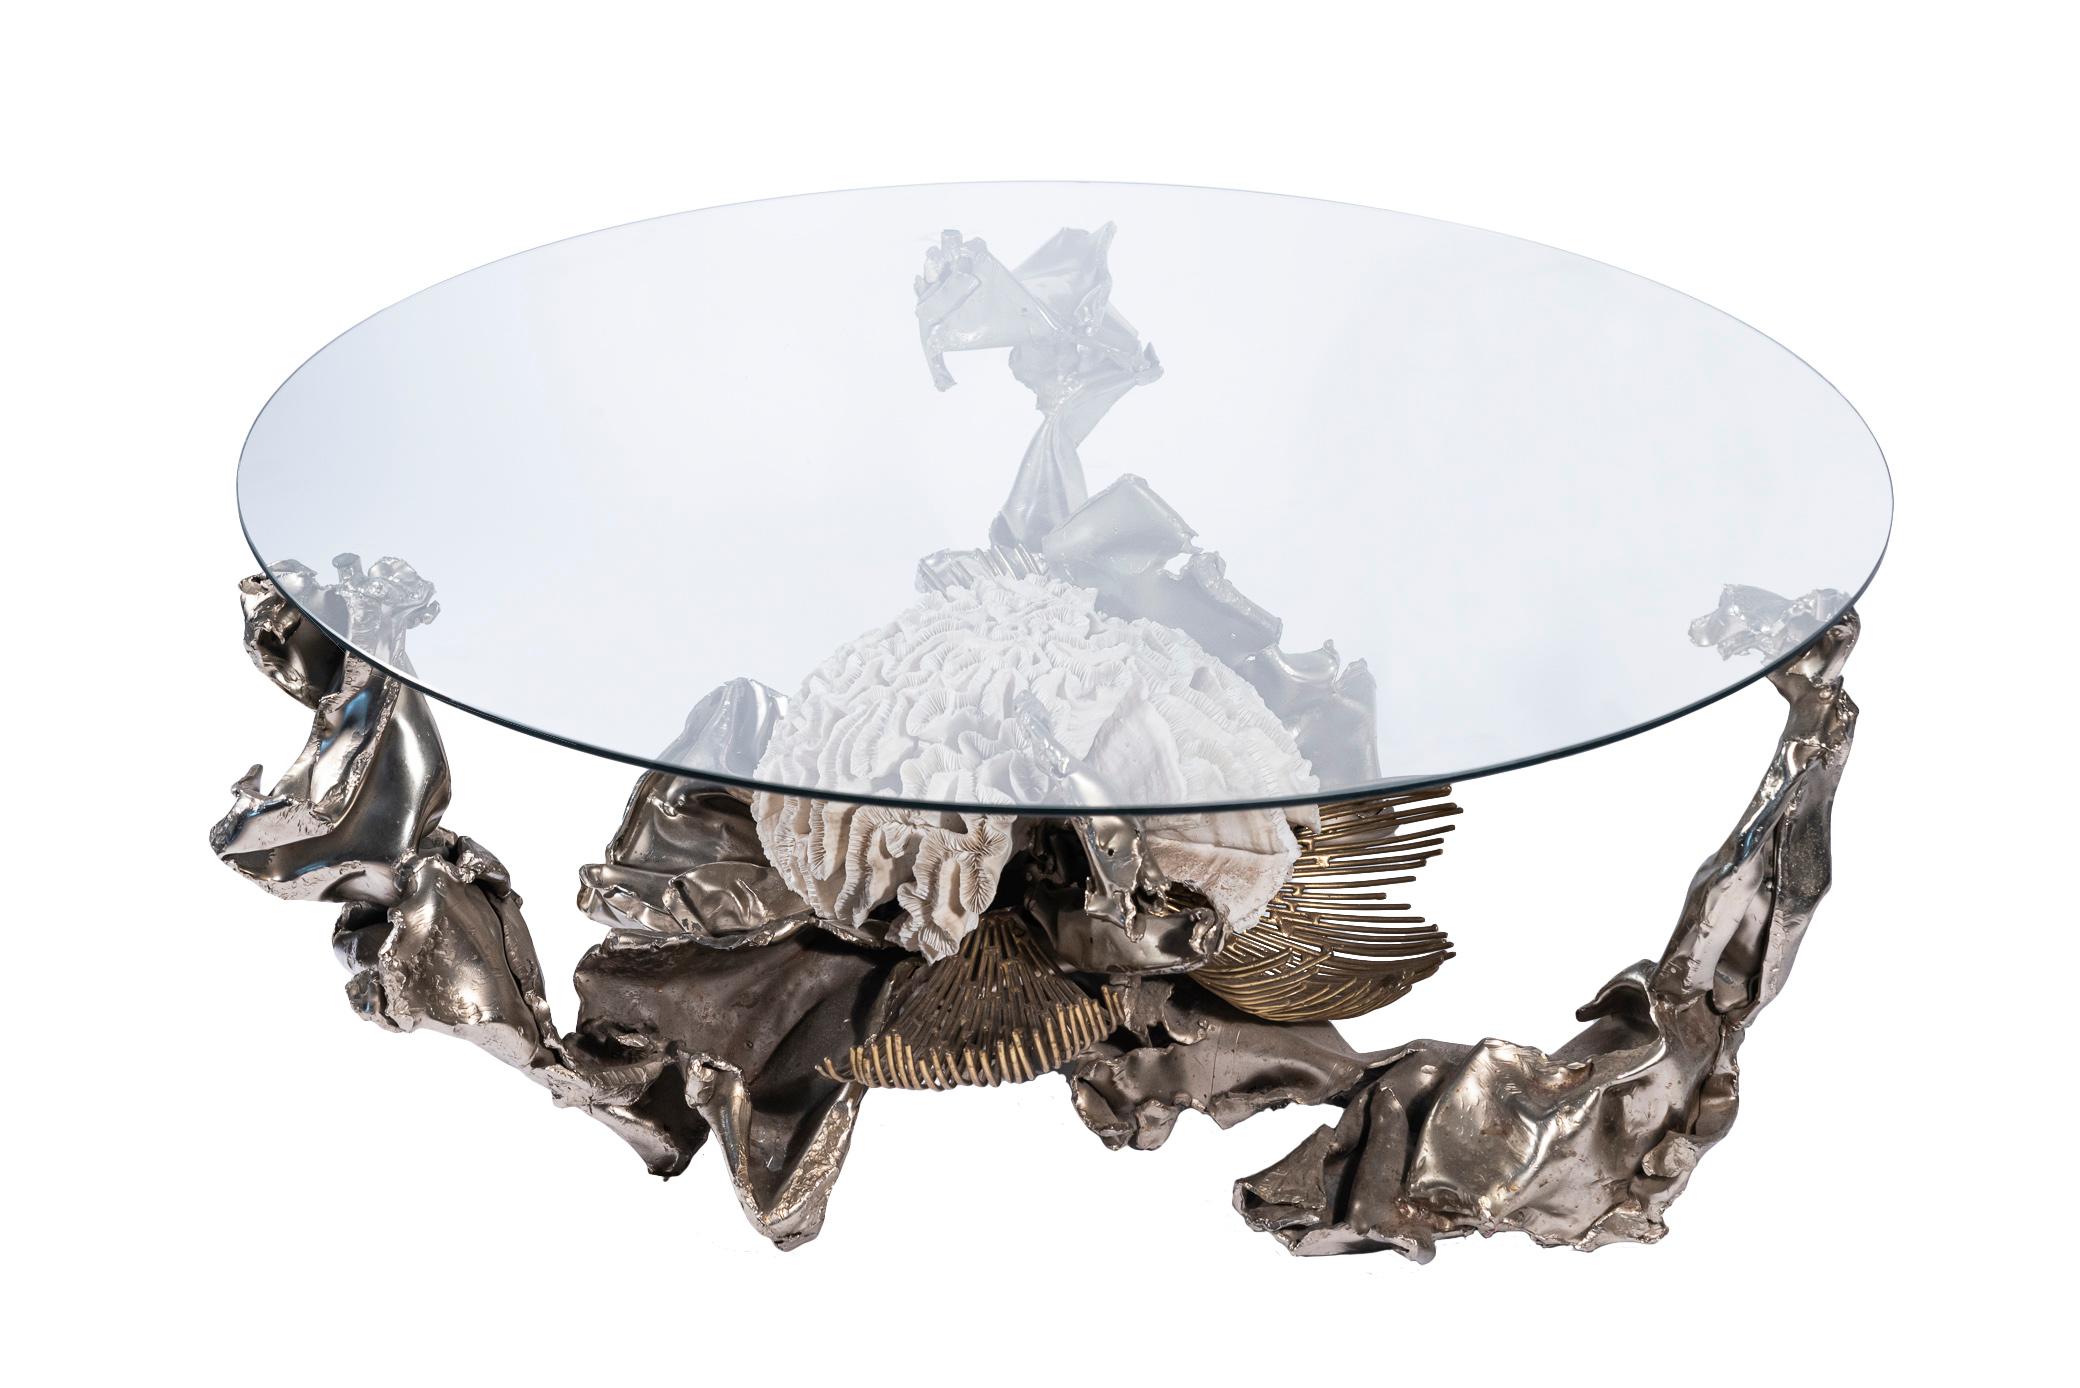 Jacques Duval Brasseur (1931-2021)
Sculpture coffee table, 
Iron and golden bronze, white coral,
Signed 